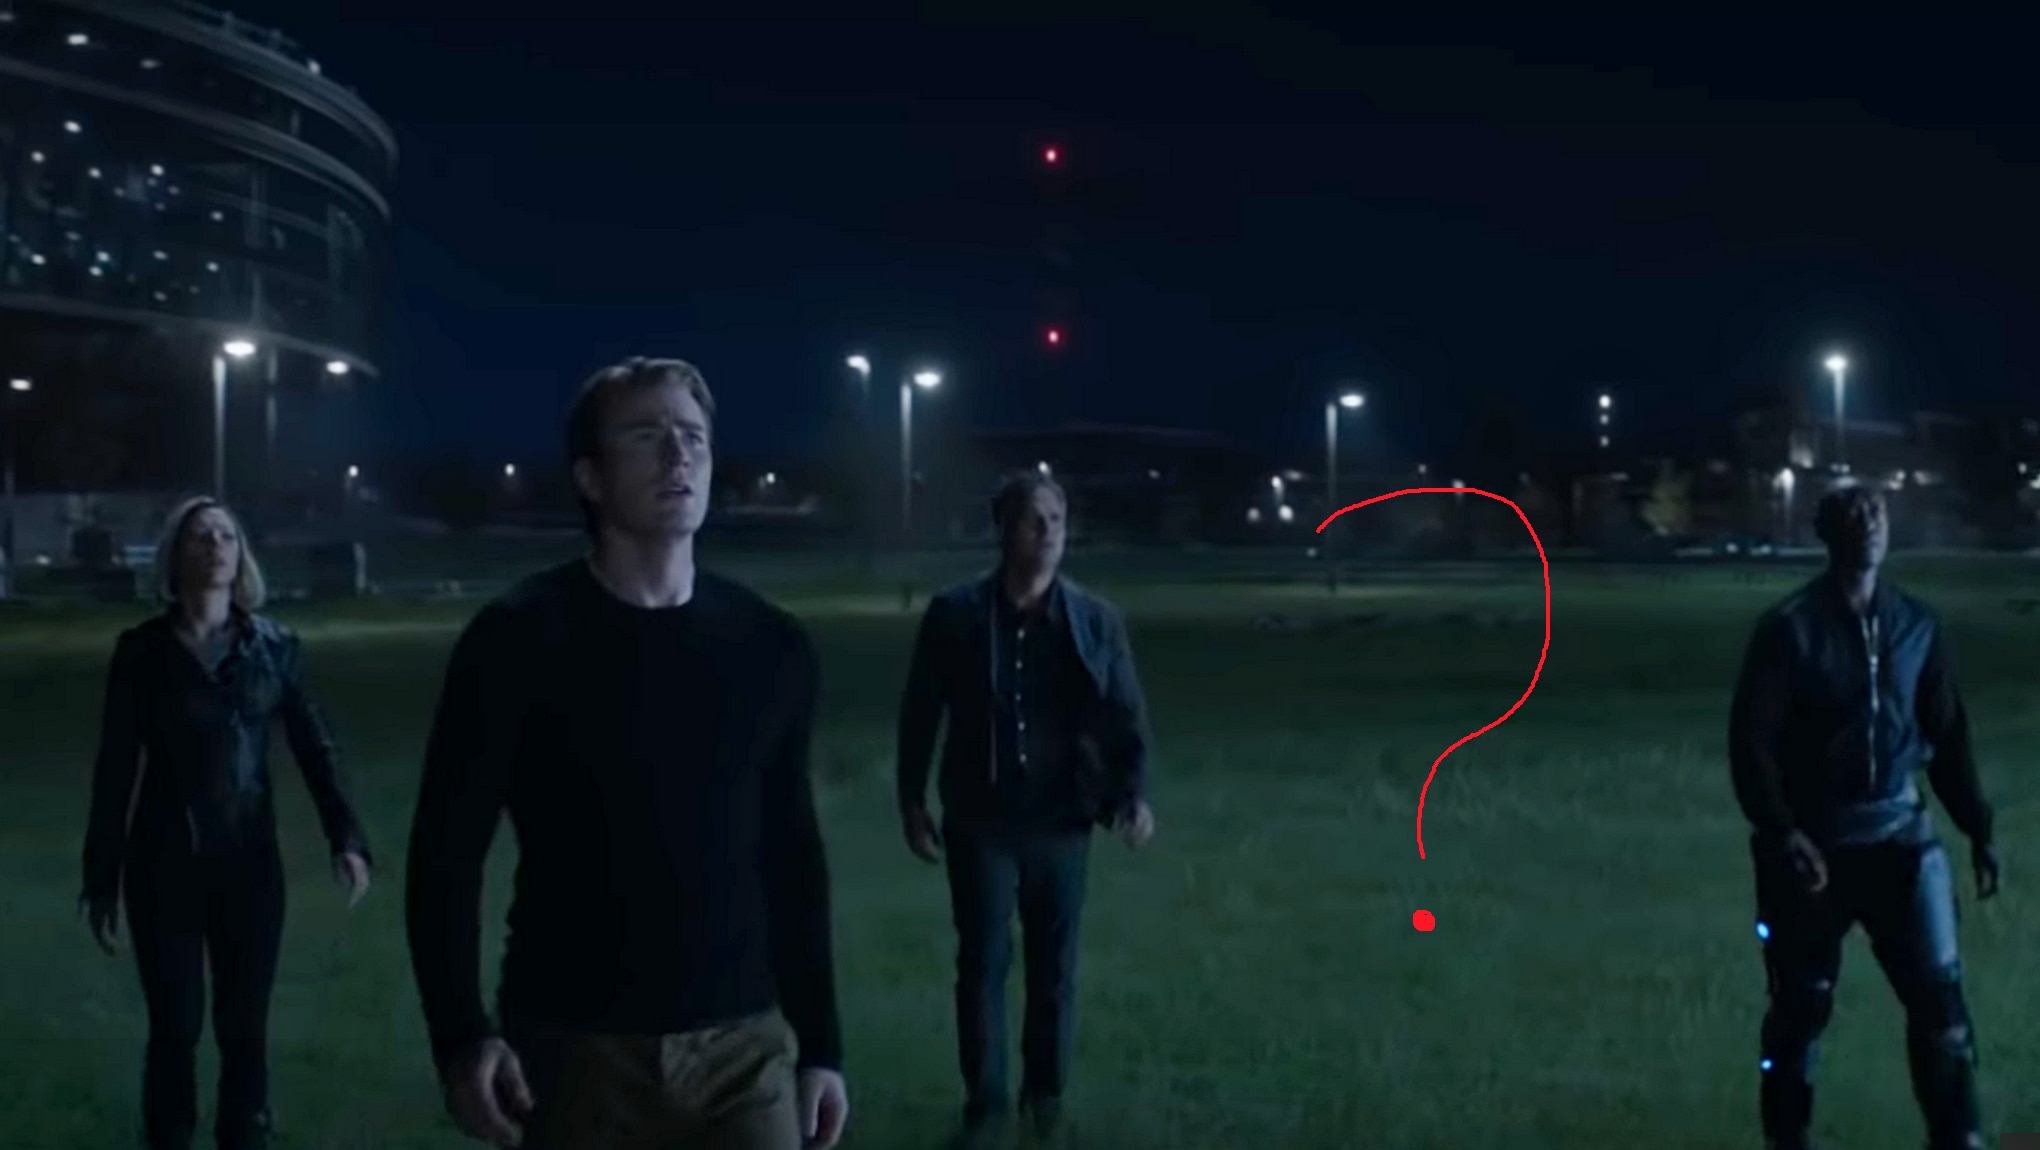 Bitterness Loudspeaker property Fan theory suggests a character was edited out of the latest Avengers:  Endgame teaser | SYFY WIRE